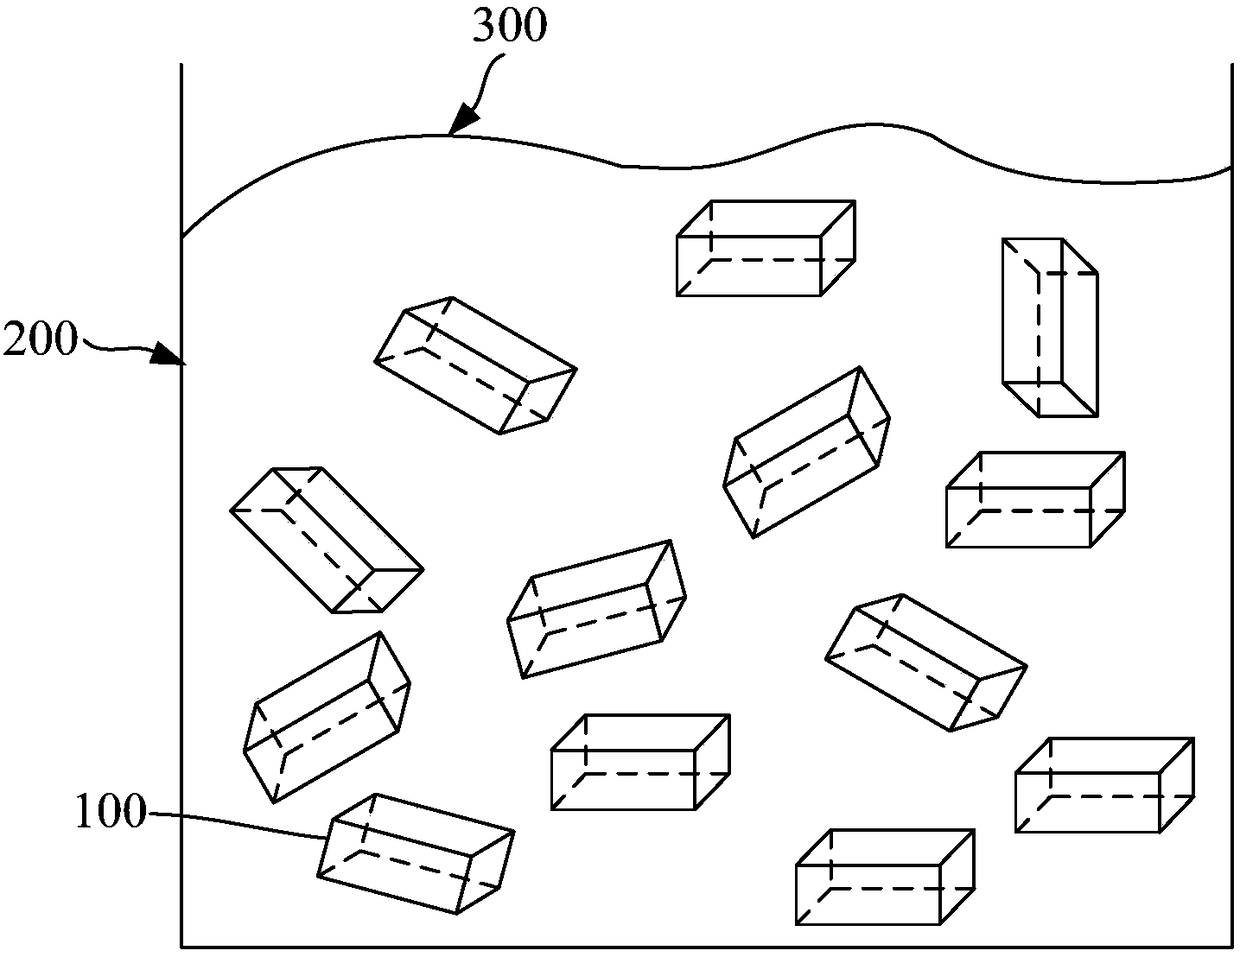 Surface treatment method of silver evaporating material